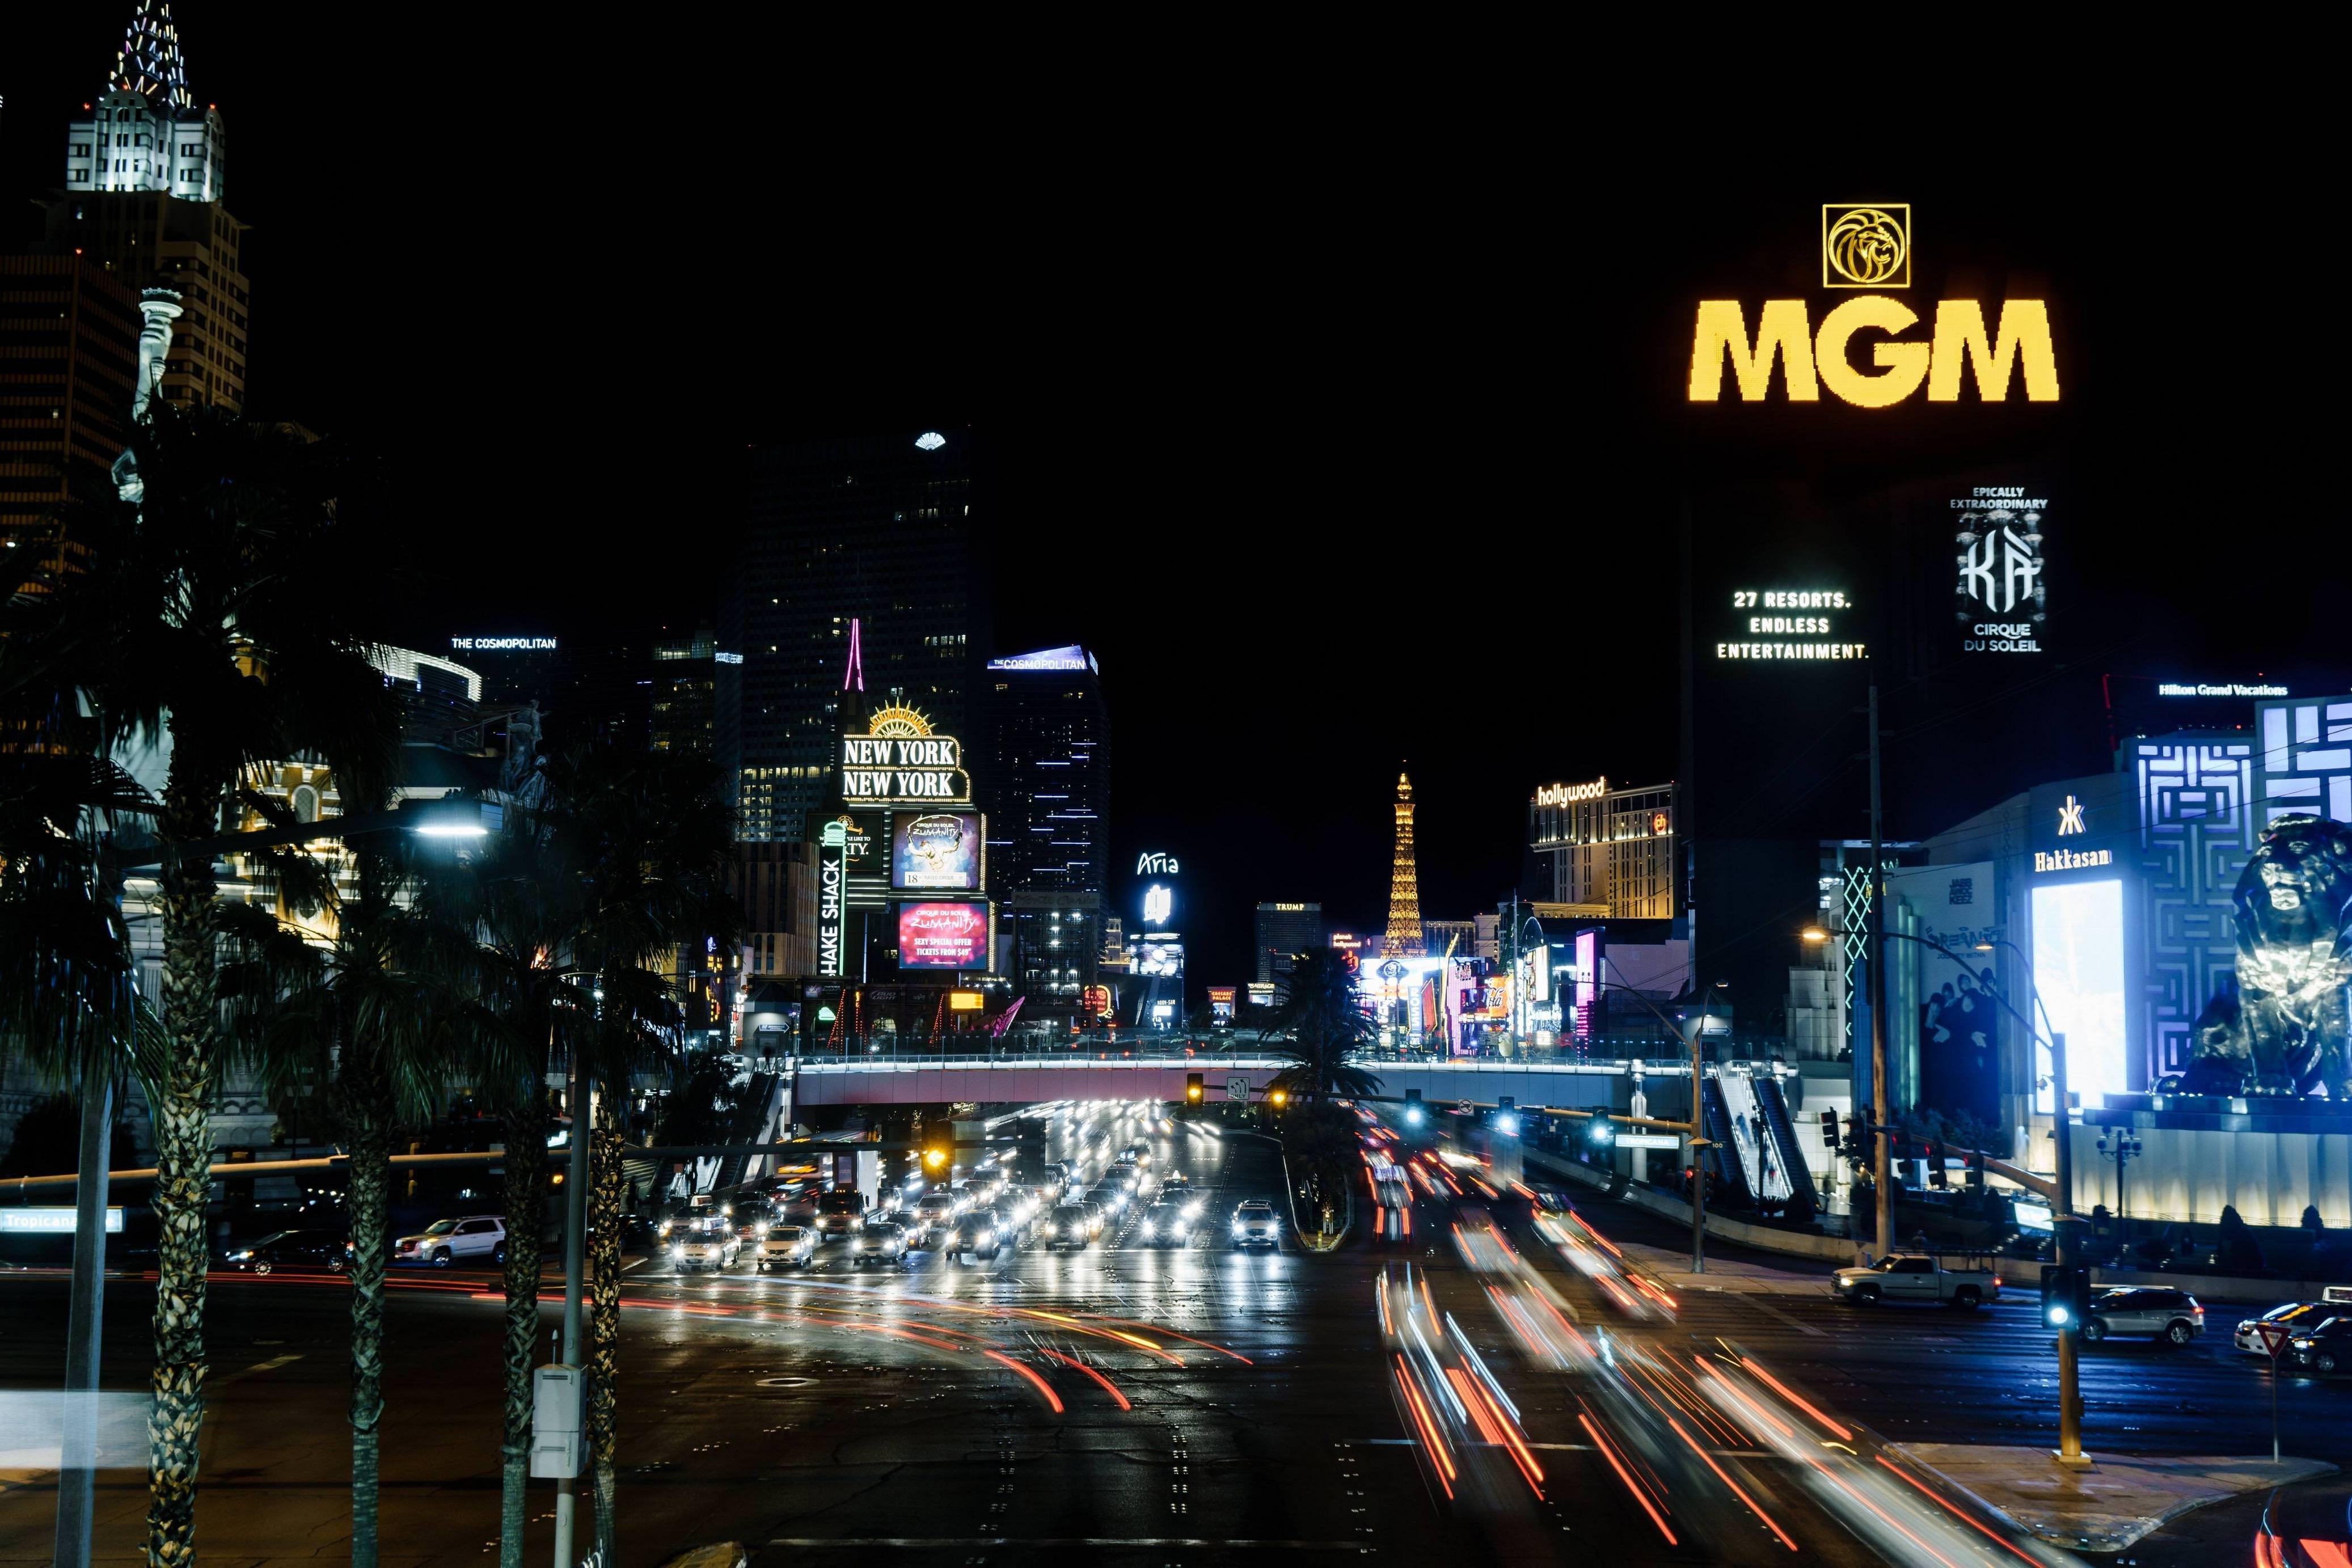 Vegas 4K wallpaper for your desktop or mobile screen free and easy to download